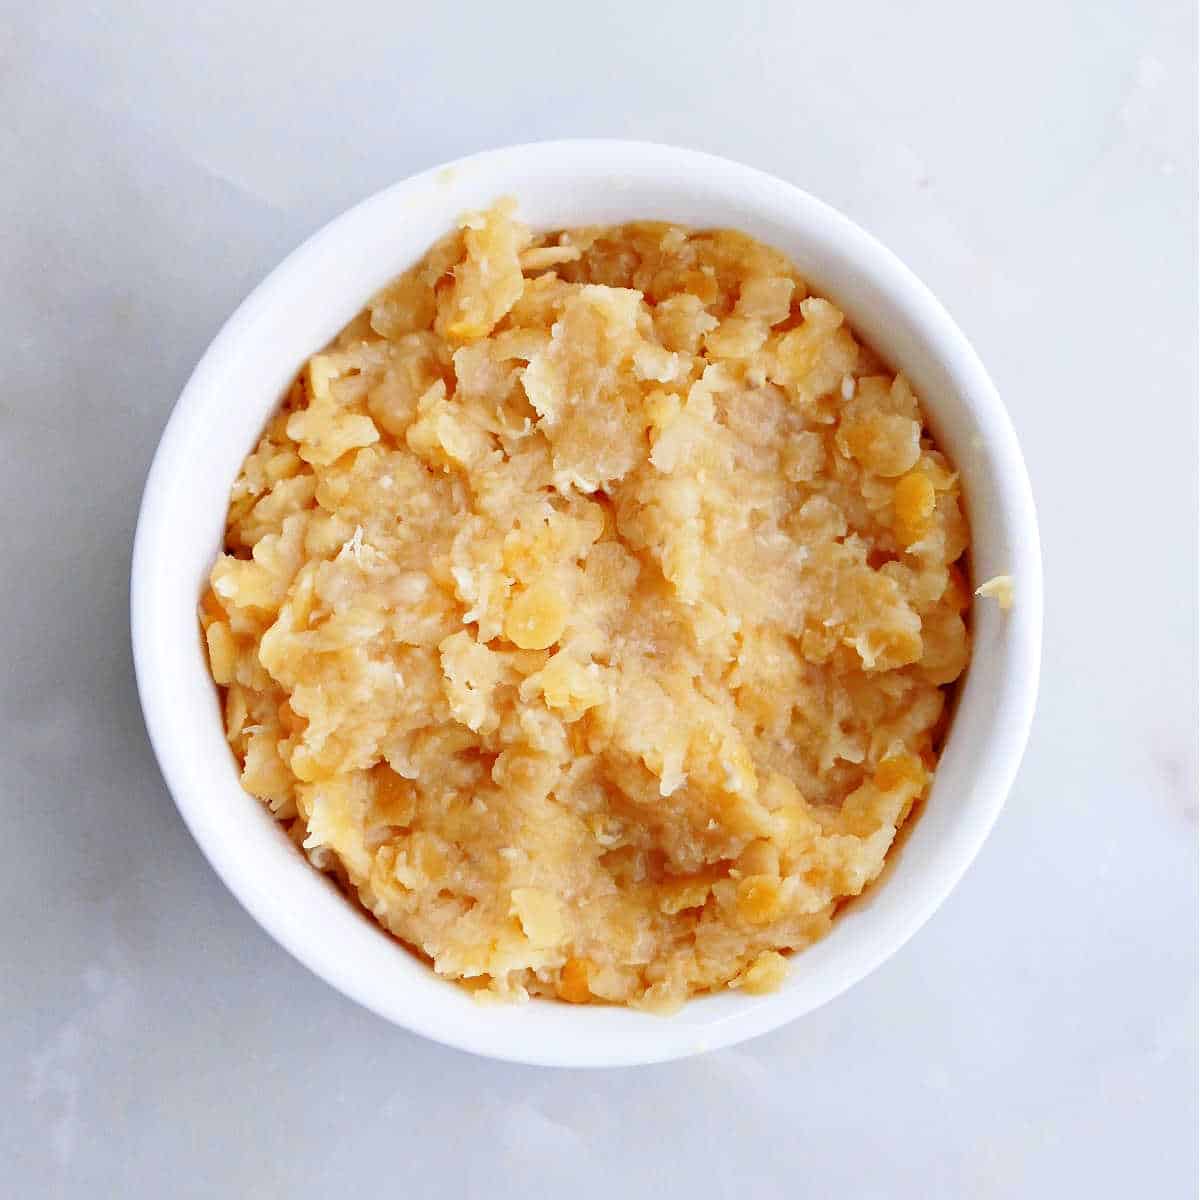 cooked red lentils with a mushy texture in a small bowl on a counter